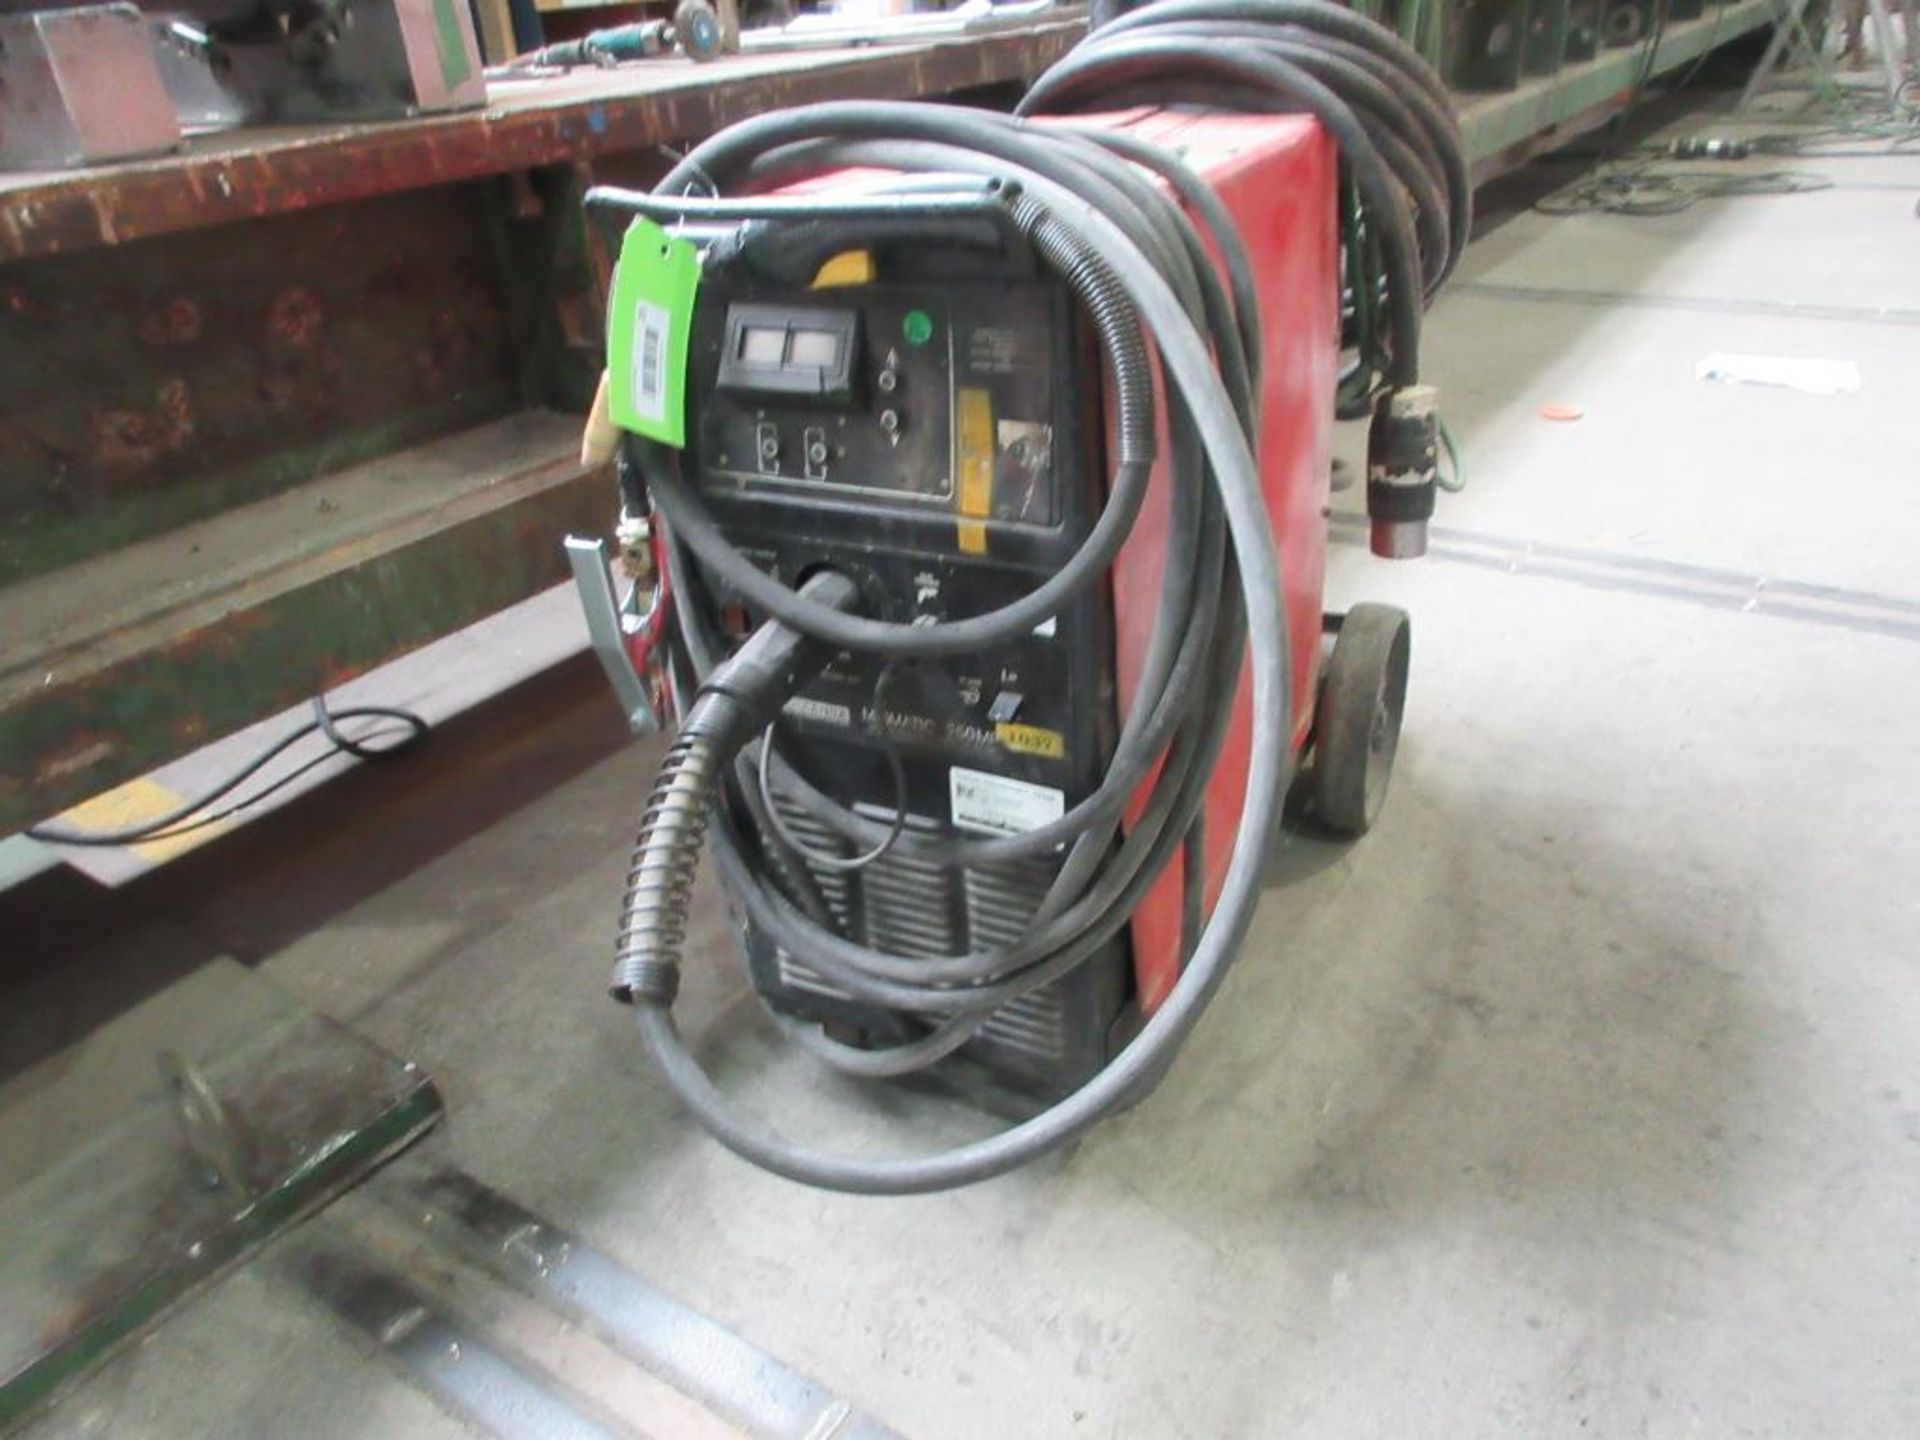 CANOX MIGMATIC 250MP WELDER W/CART AND CABLES (NO TANK) [LOCATED AT 1401 GRAHAM-BELL, BOUCHERVILLE,